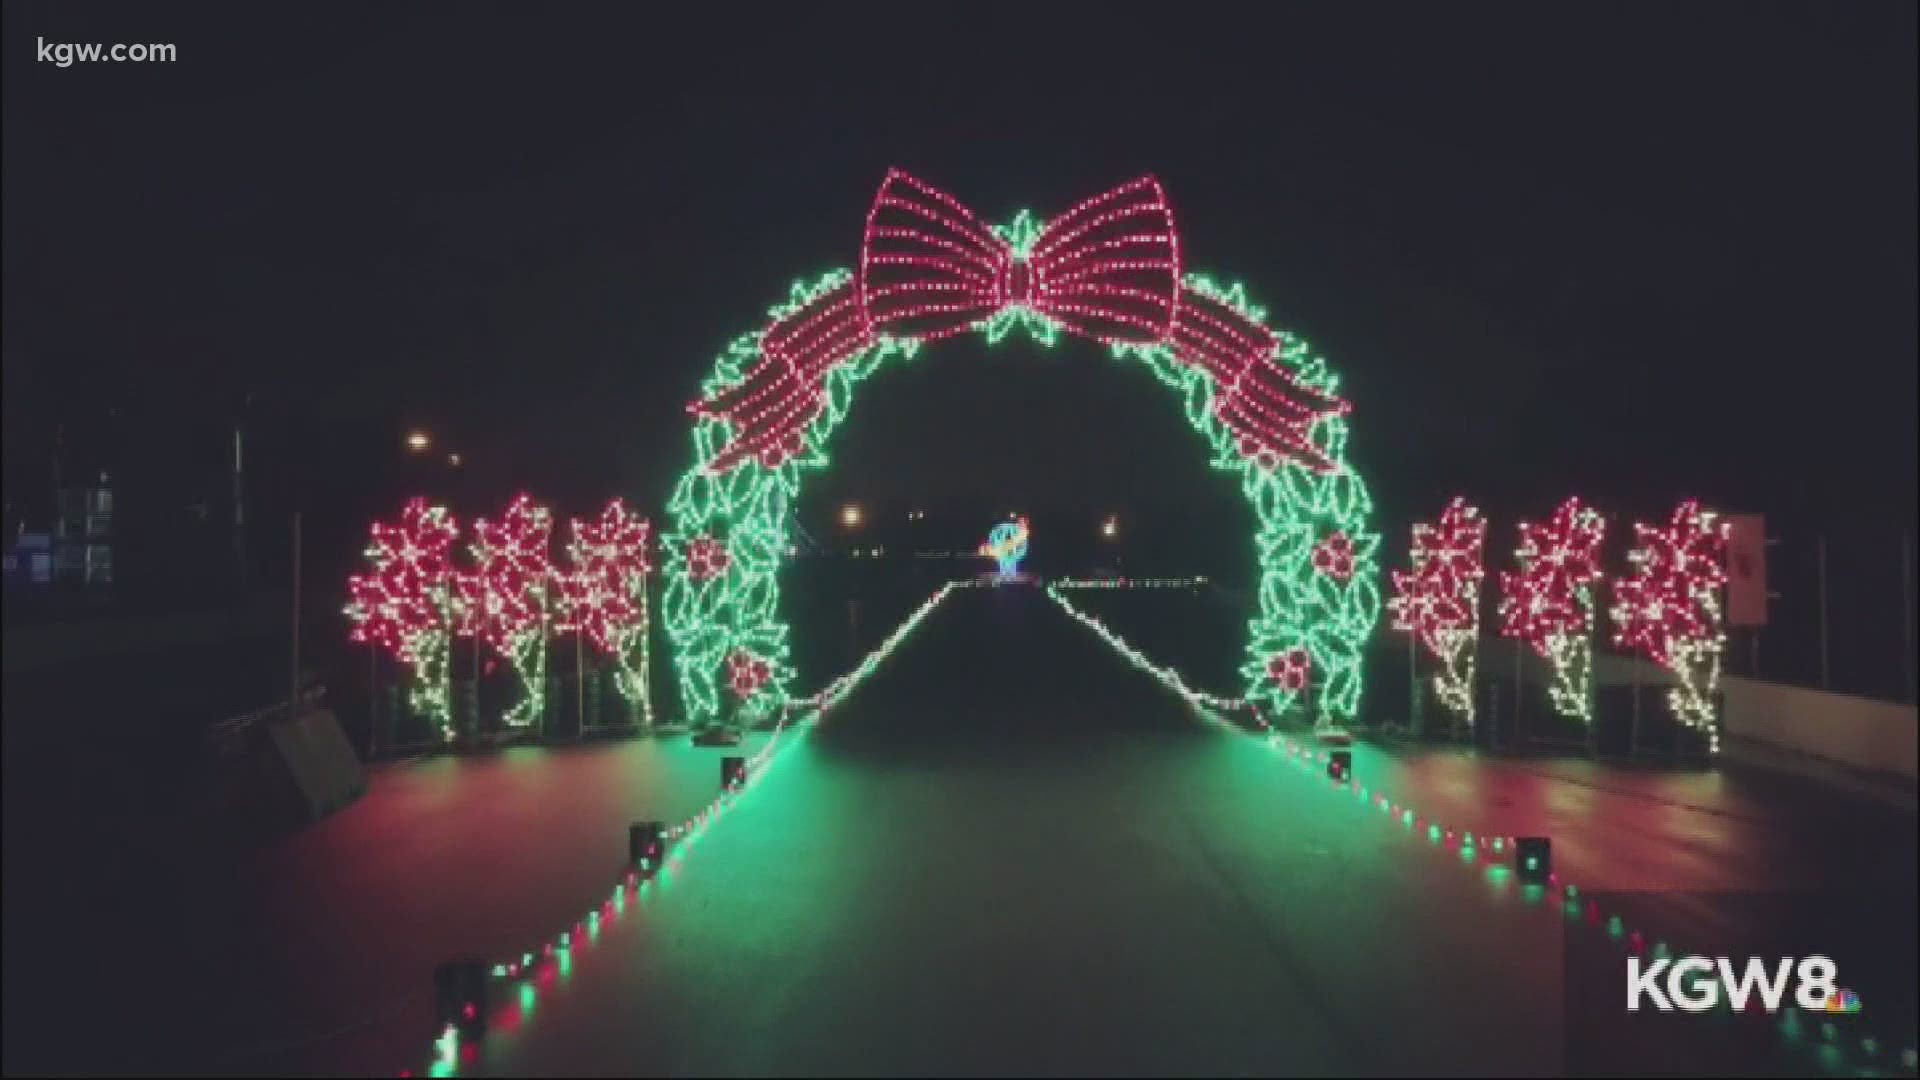 Some Oregon and Portland holiday traditions are canceled due to the pandemic, like Peacock  Lane's light display, but others are adapting to the changes.